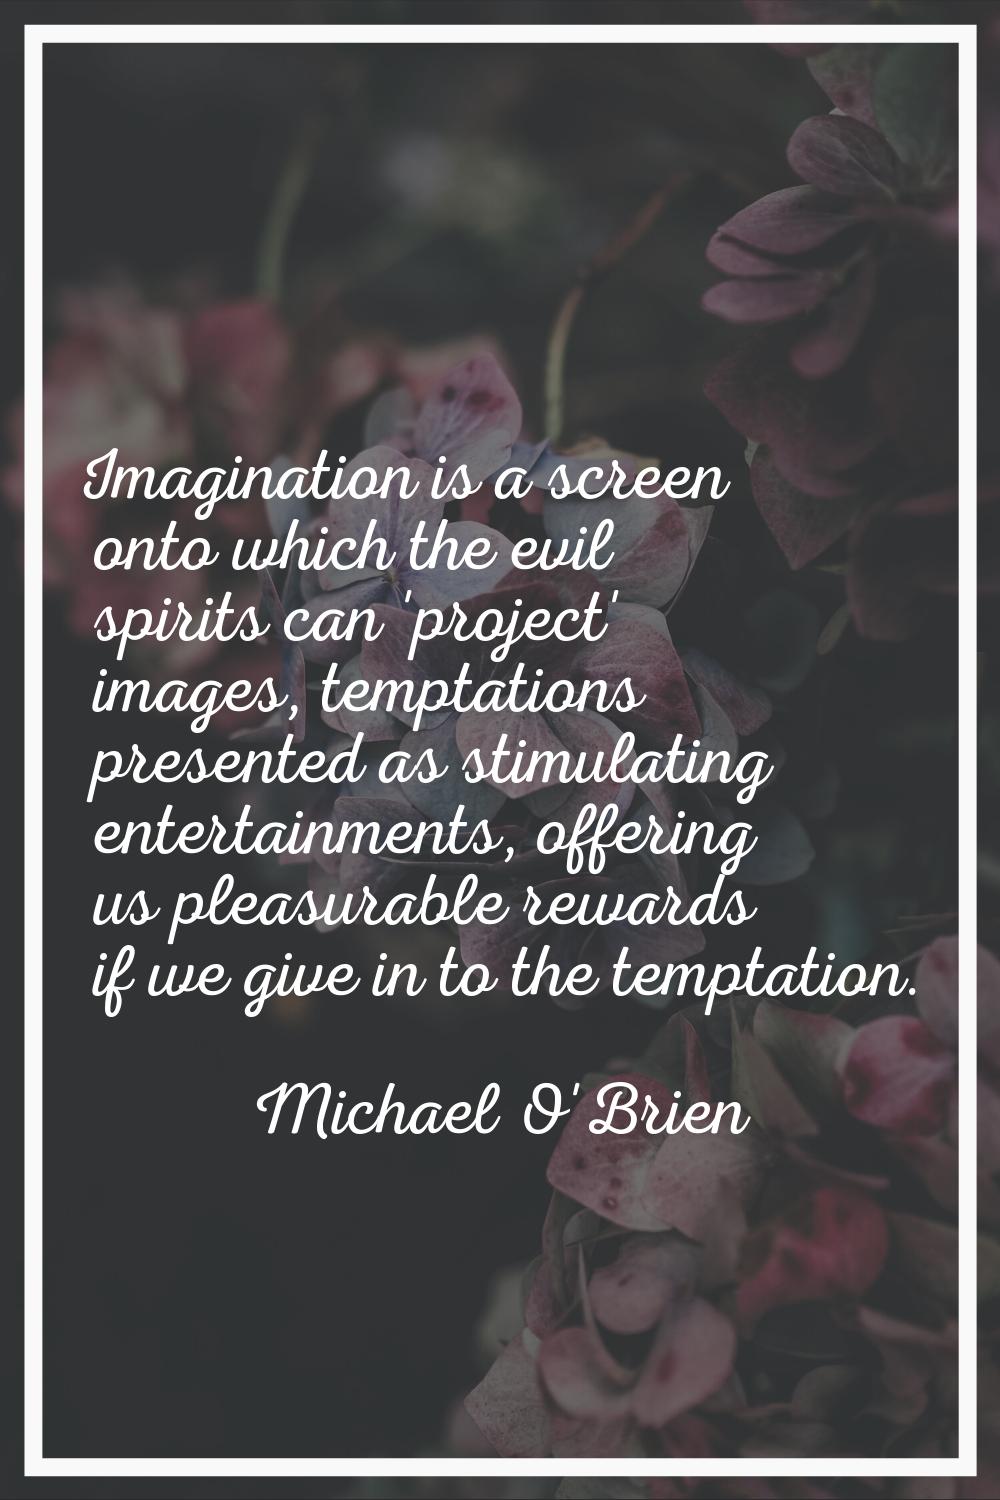 Imagination is a screen onto which the evil spirits can 'project' images, temptations presented as 